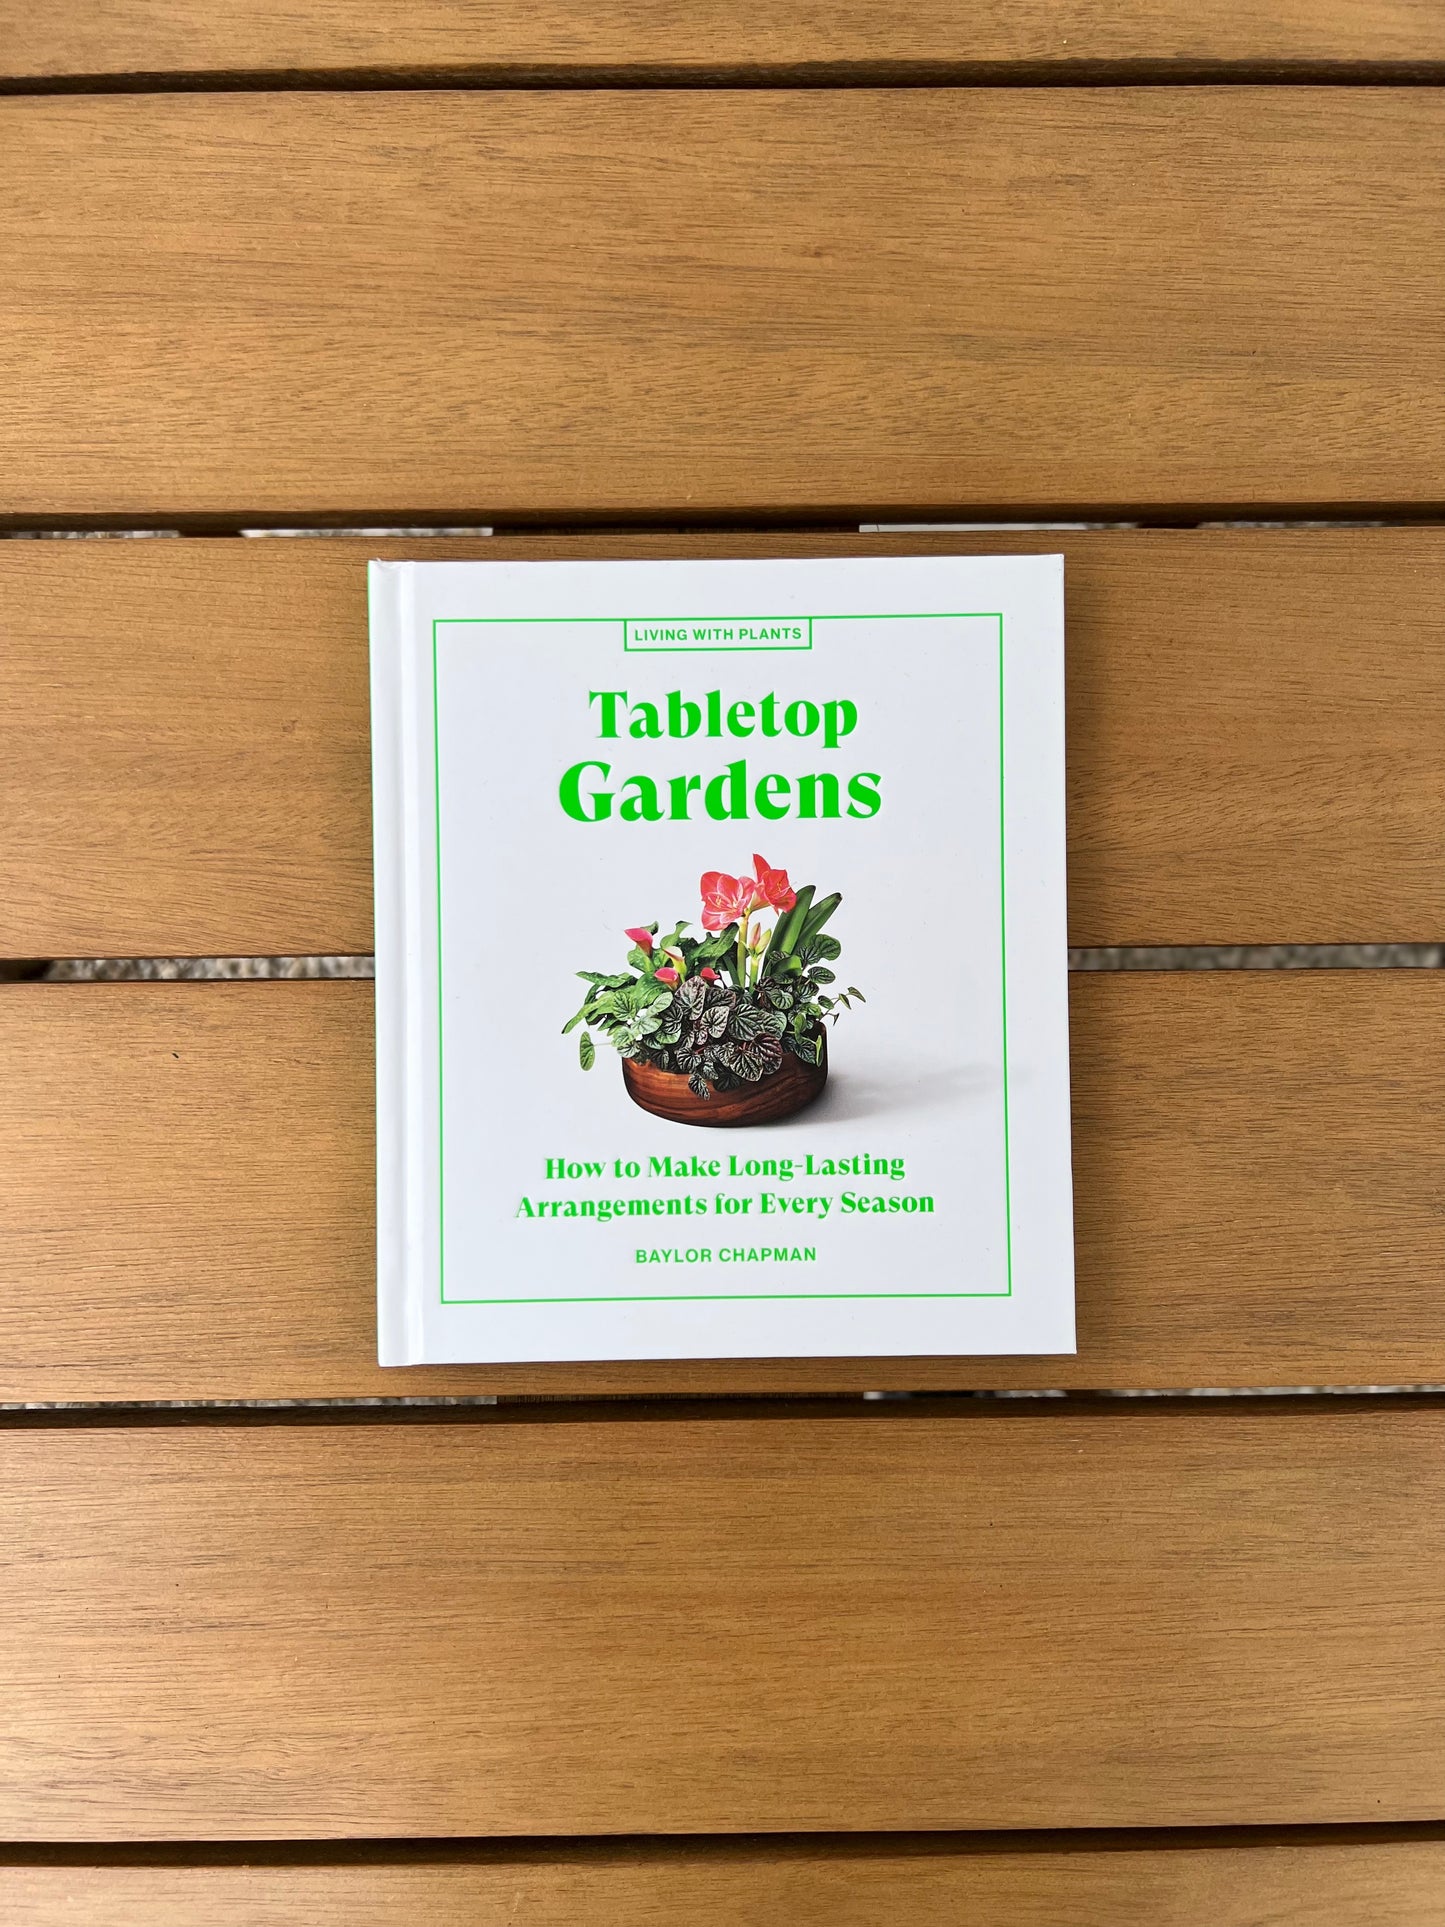 "Tabletop Gardens: How to Make Long-Lasting Arrangements for Every Season" Book